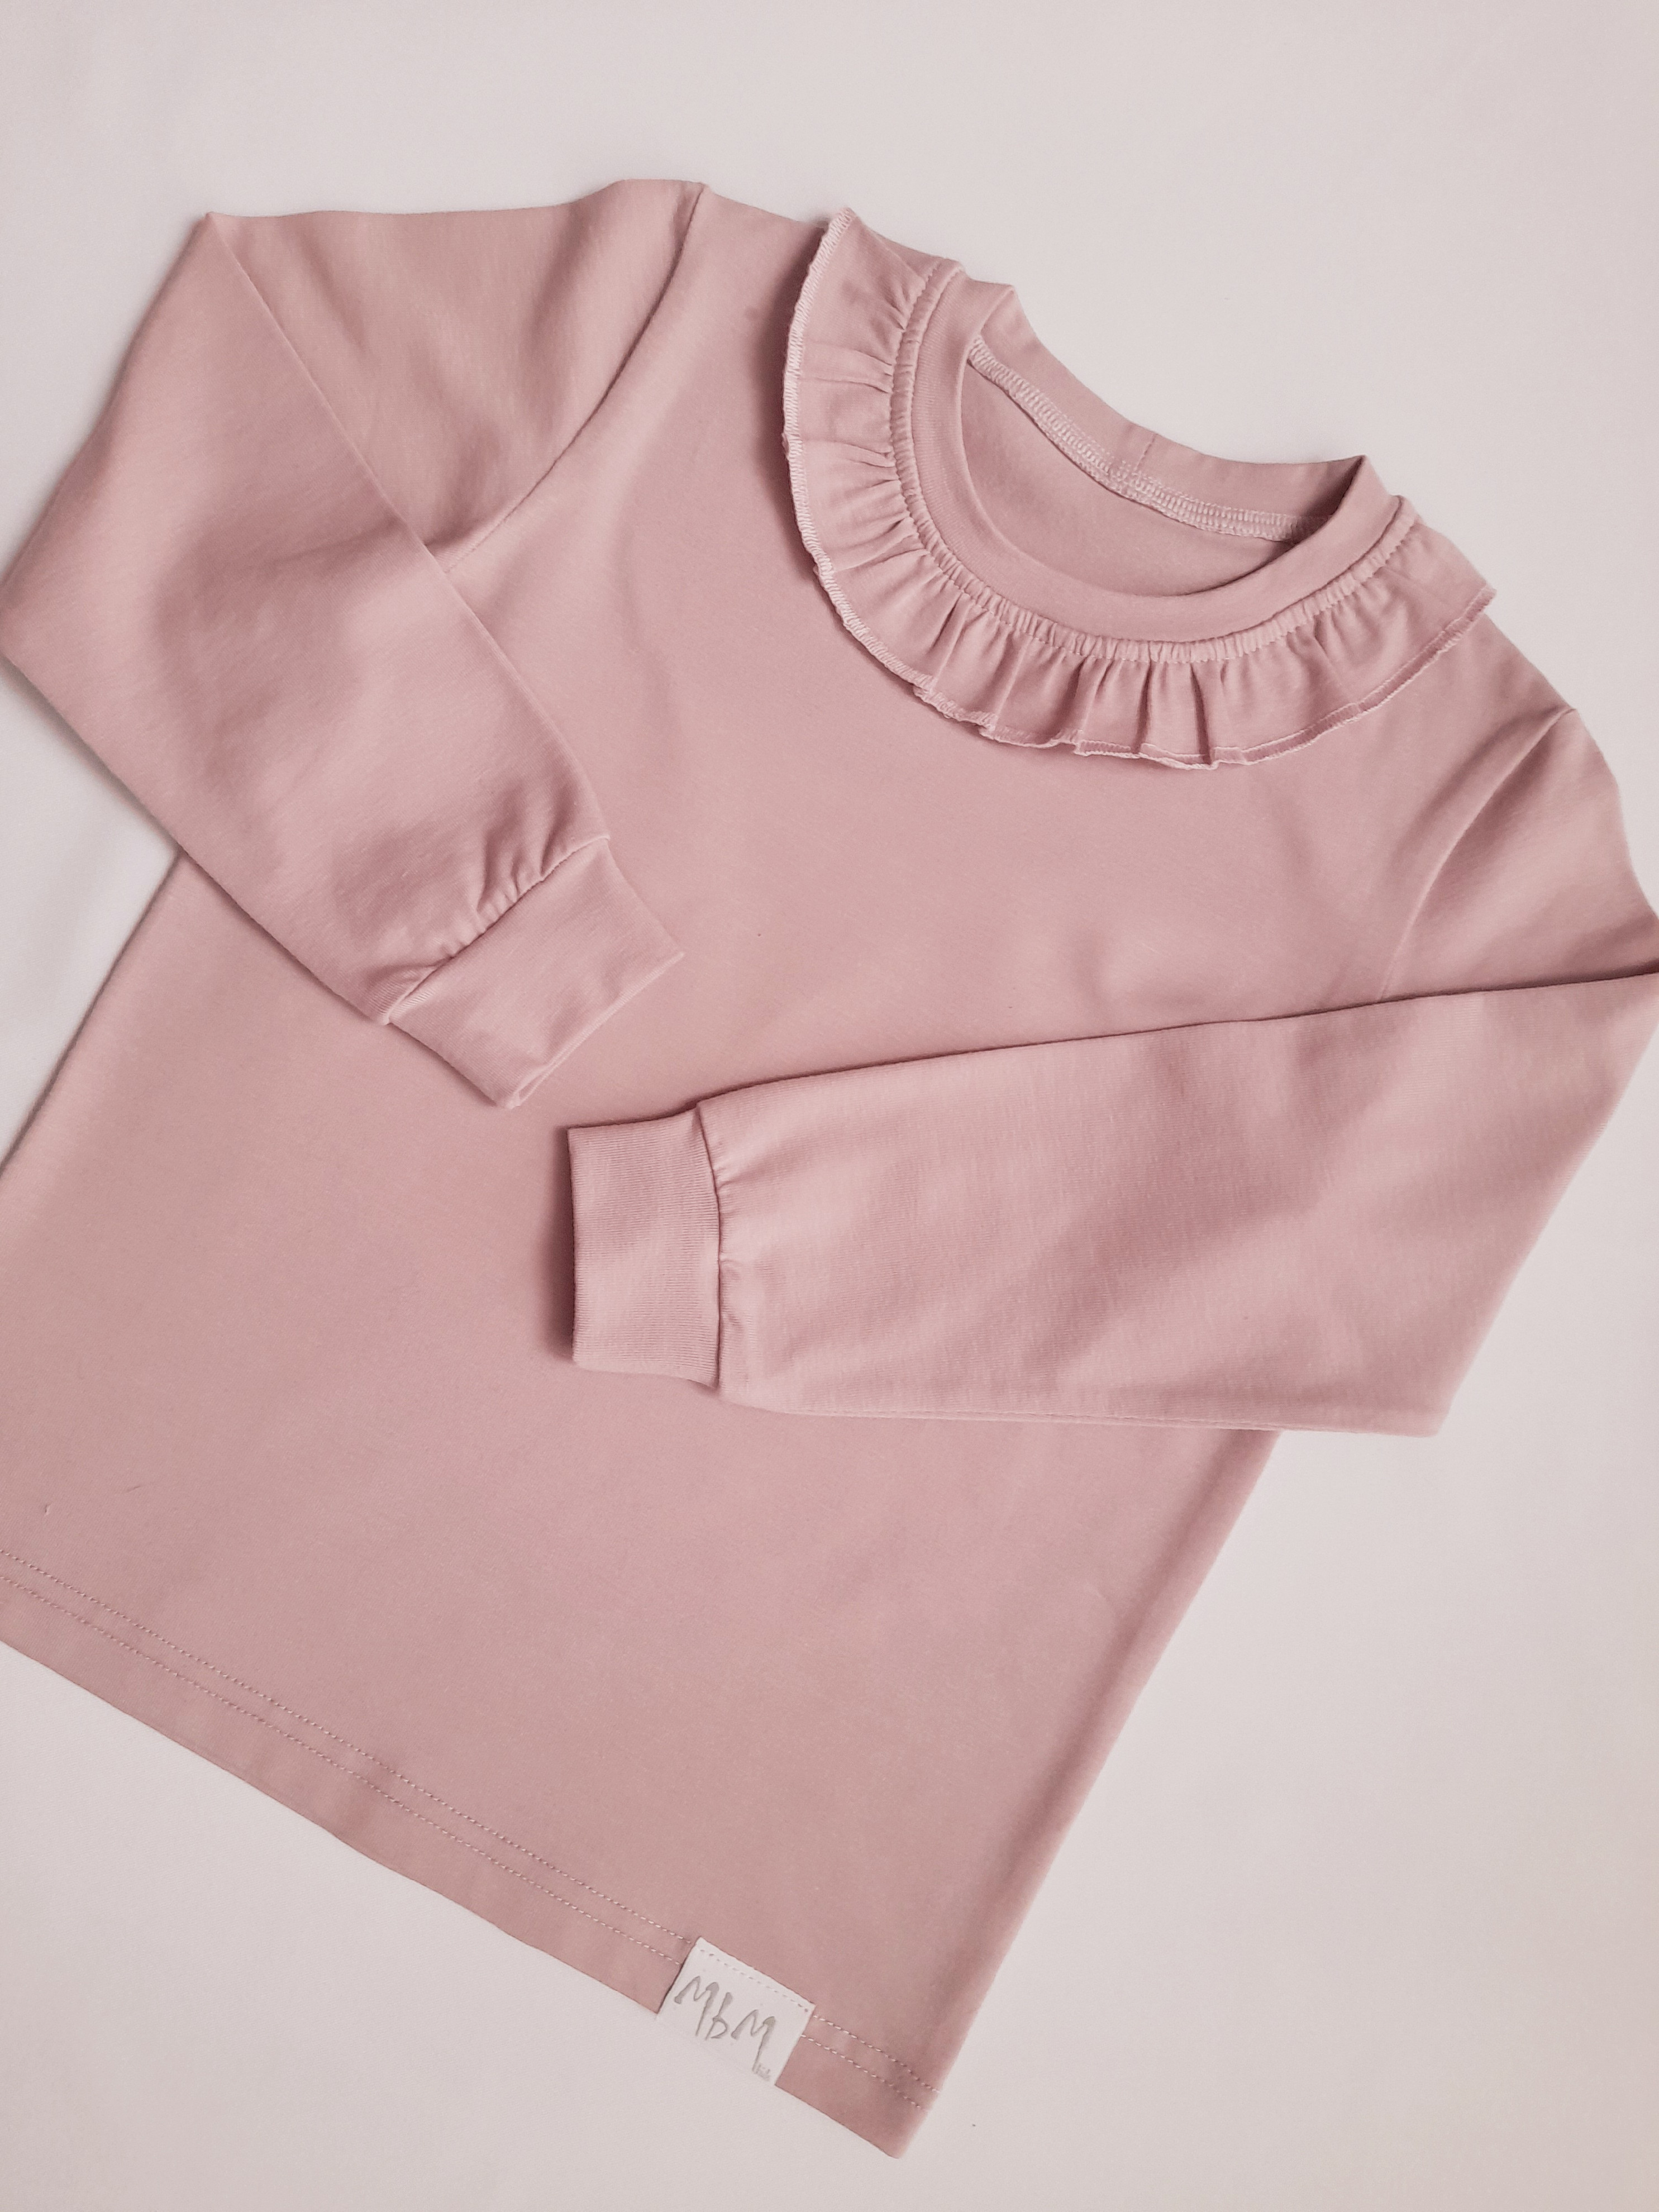 CHILD T-SHIRT DUSTY PINK Velikost: 104